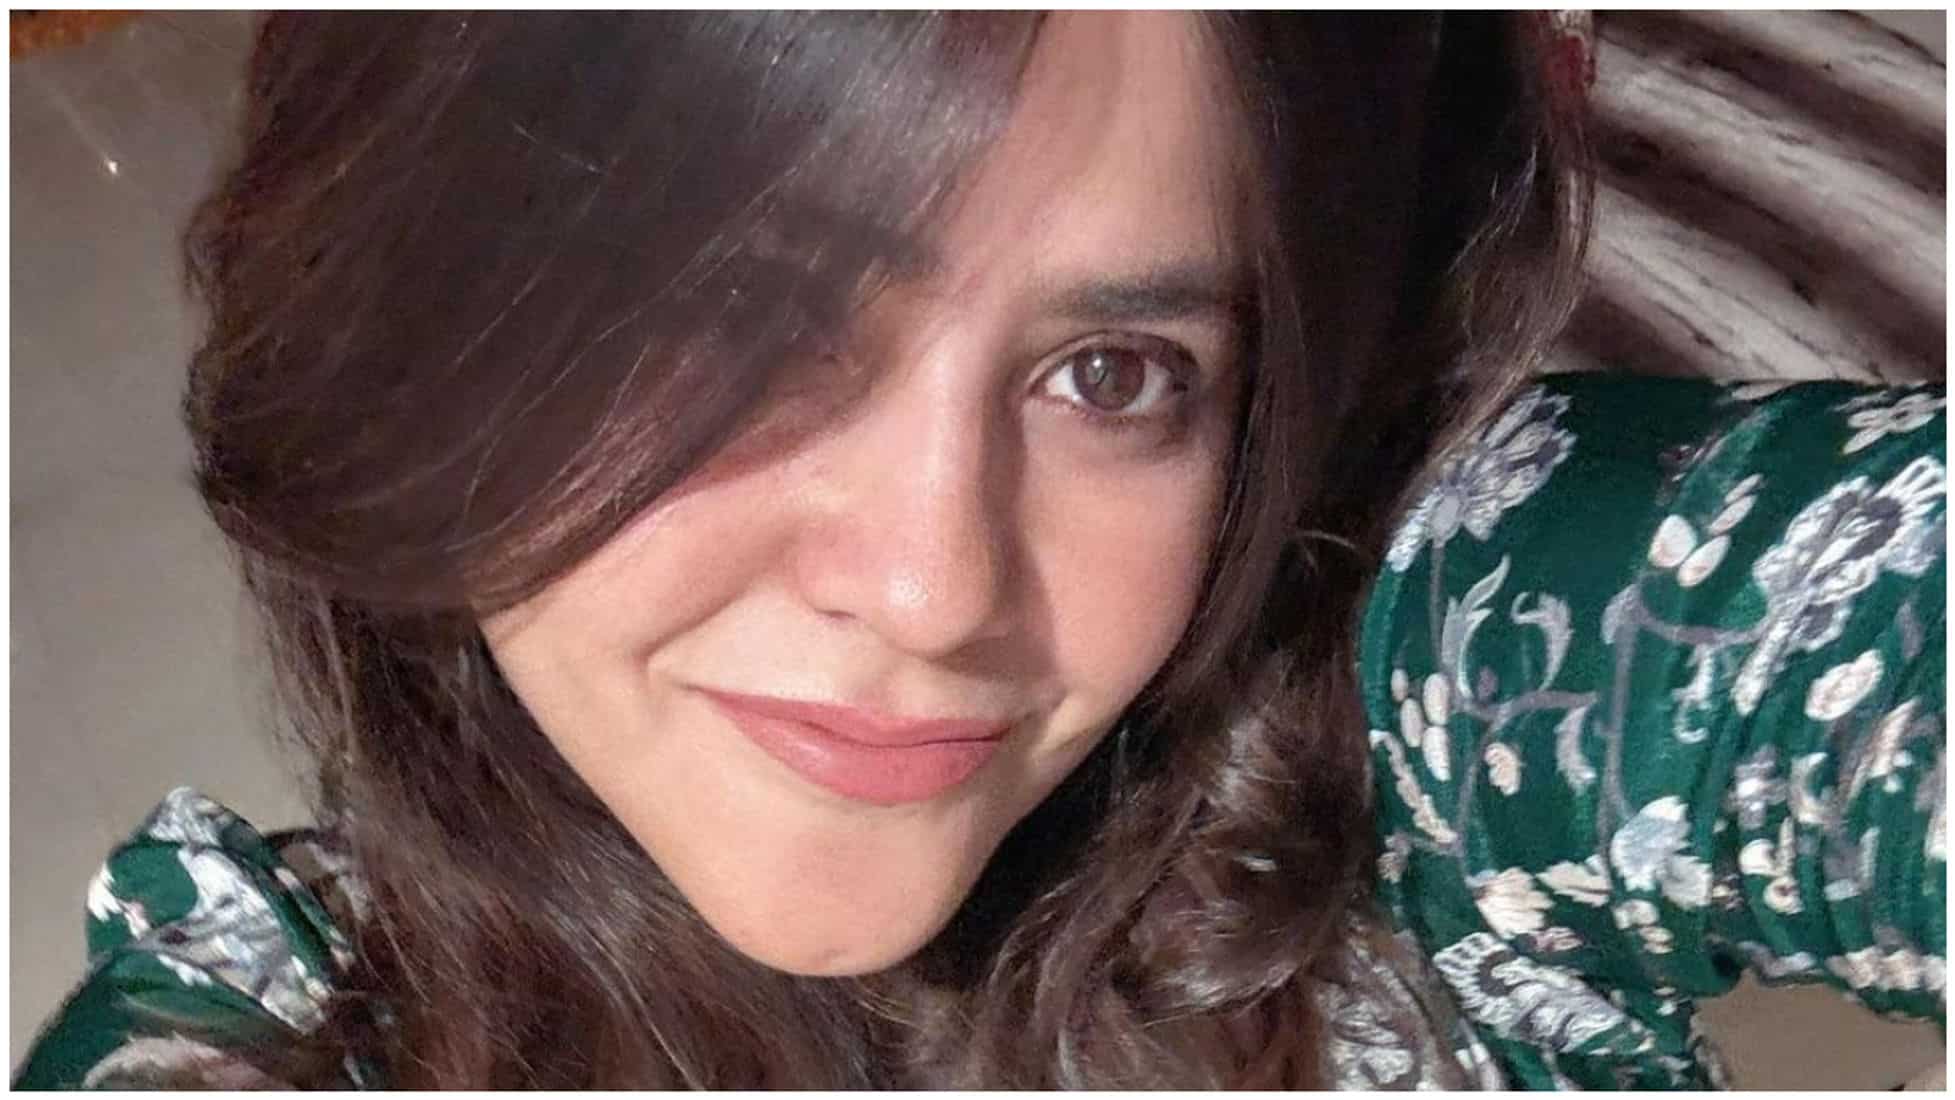 https://www.mobilemasala.com/film-gossip/Ekta-Kapoor-reflects-on-Thank-You-for-Coming-box-office-failure-and-worries-about-LSD-2-outcome-i252172